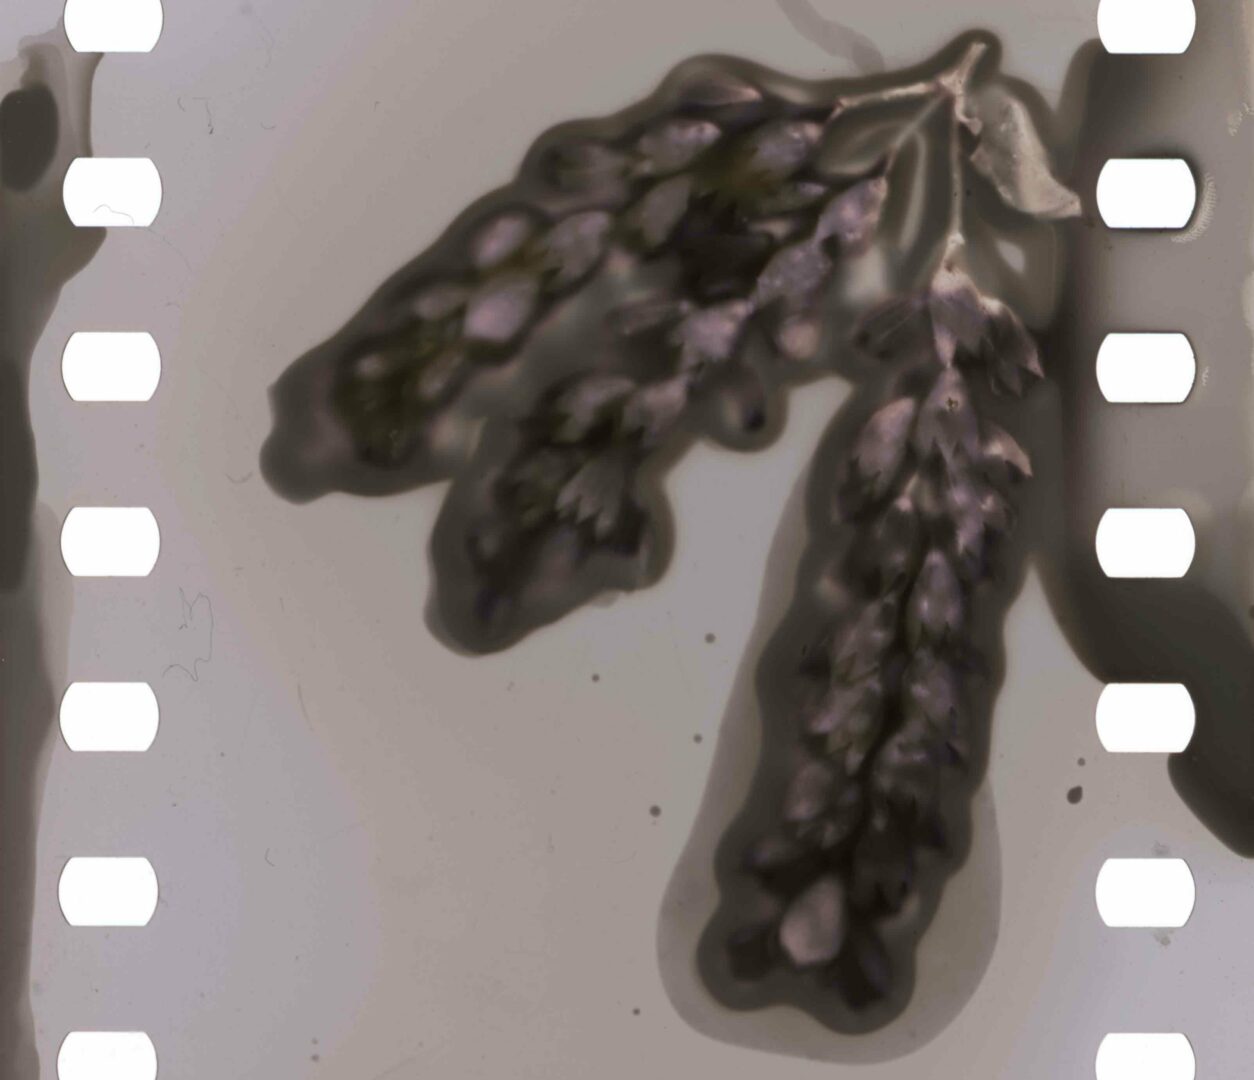 Sage leaves from a volunteer plant in the artists garden are harvested, soaked in vitamin C and sodium carbonate, placed on undeveloped black and white film and left in the sun. The leaves print themselves onto the film which is revealed when the film is run through a weak fixer.